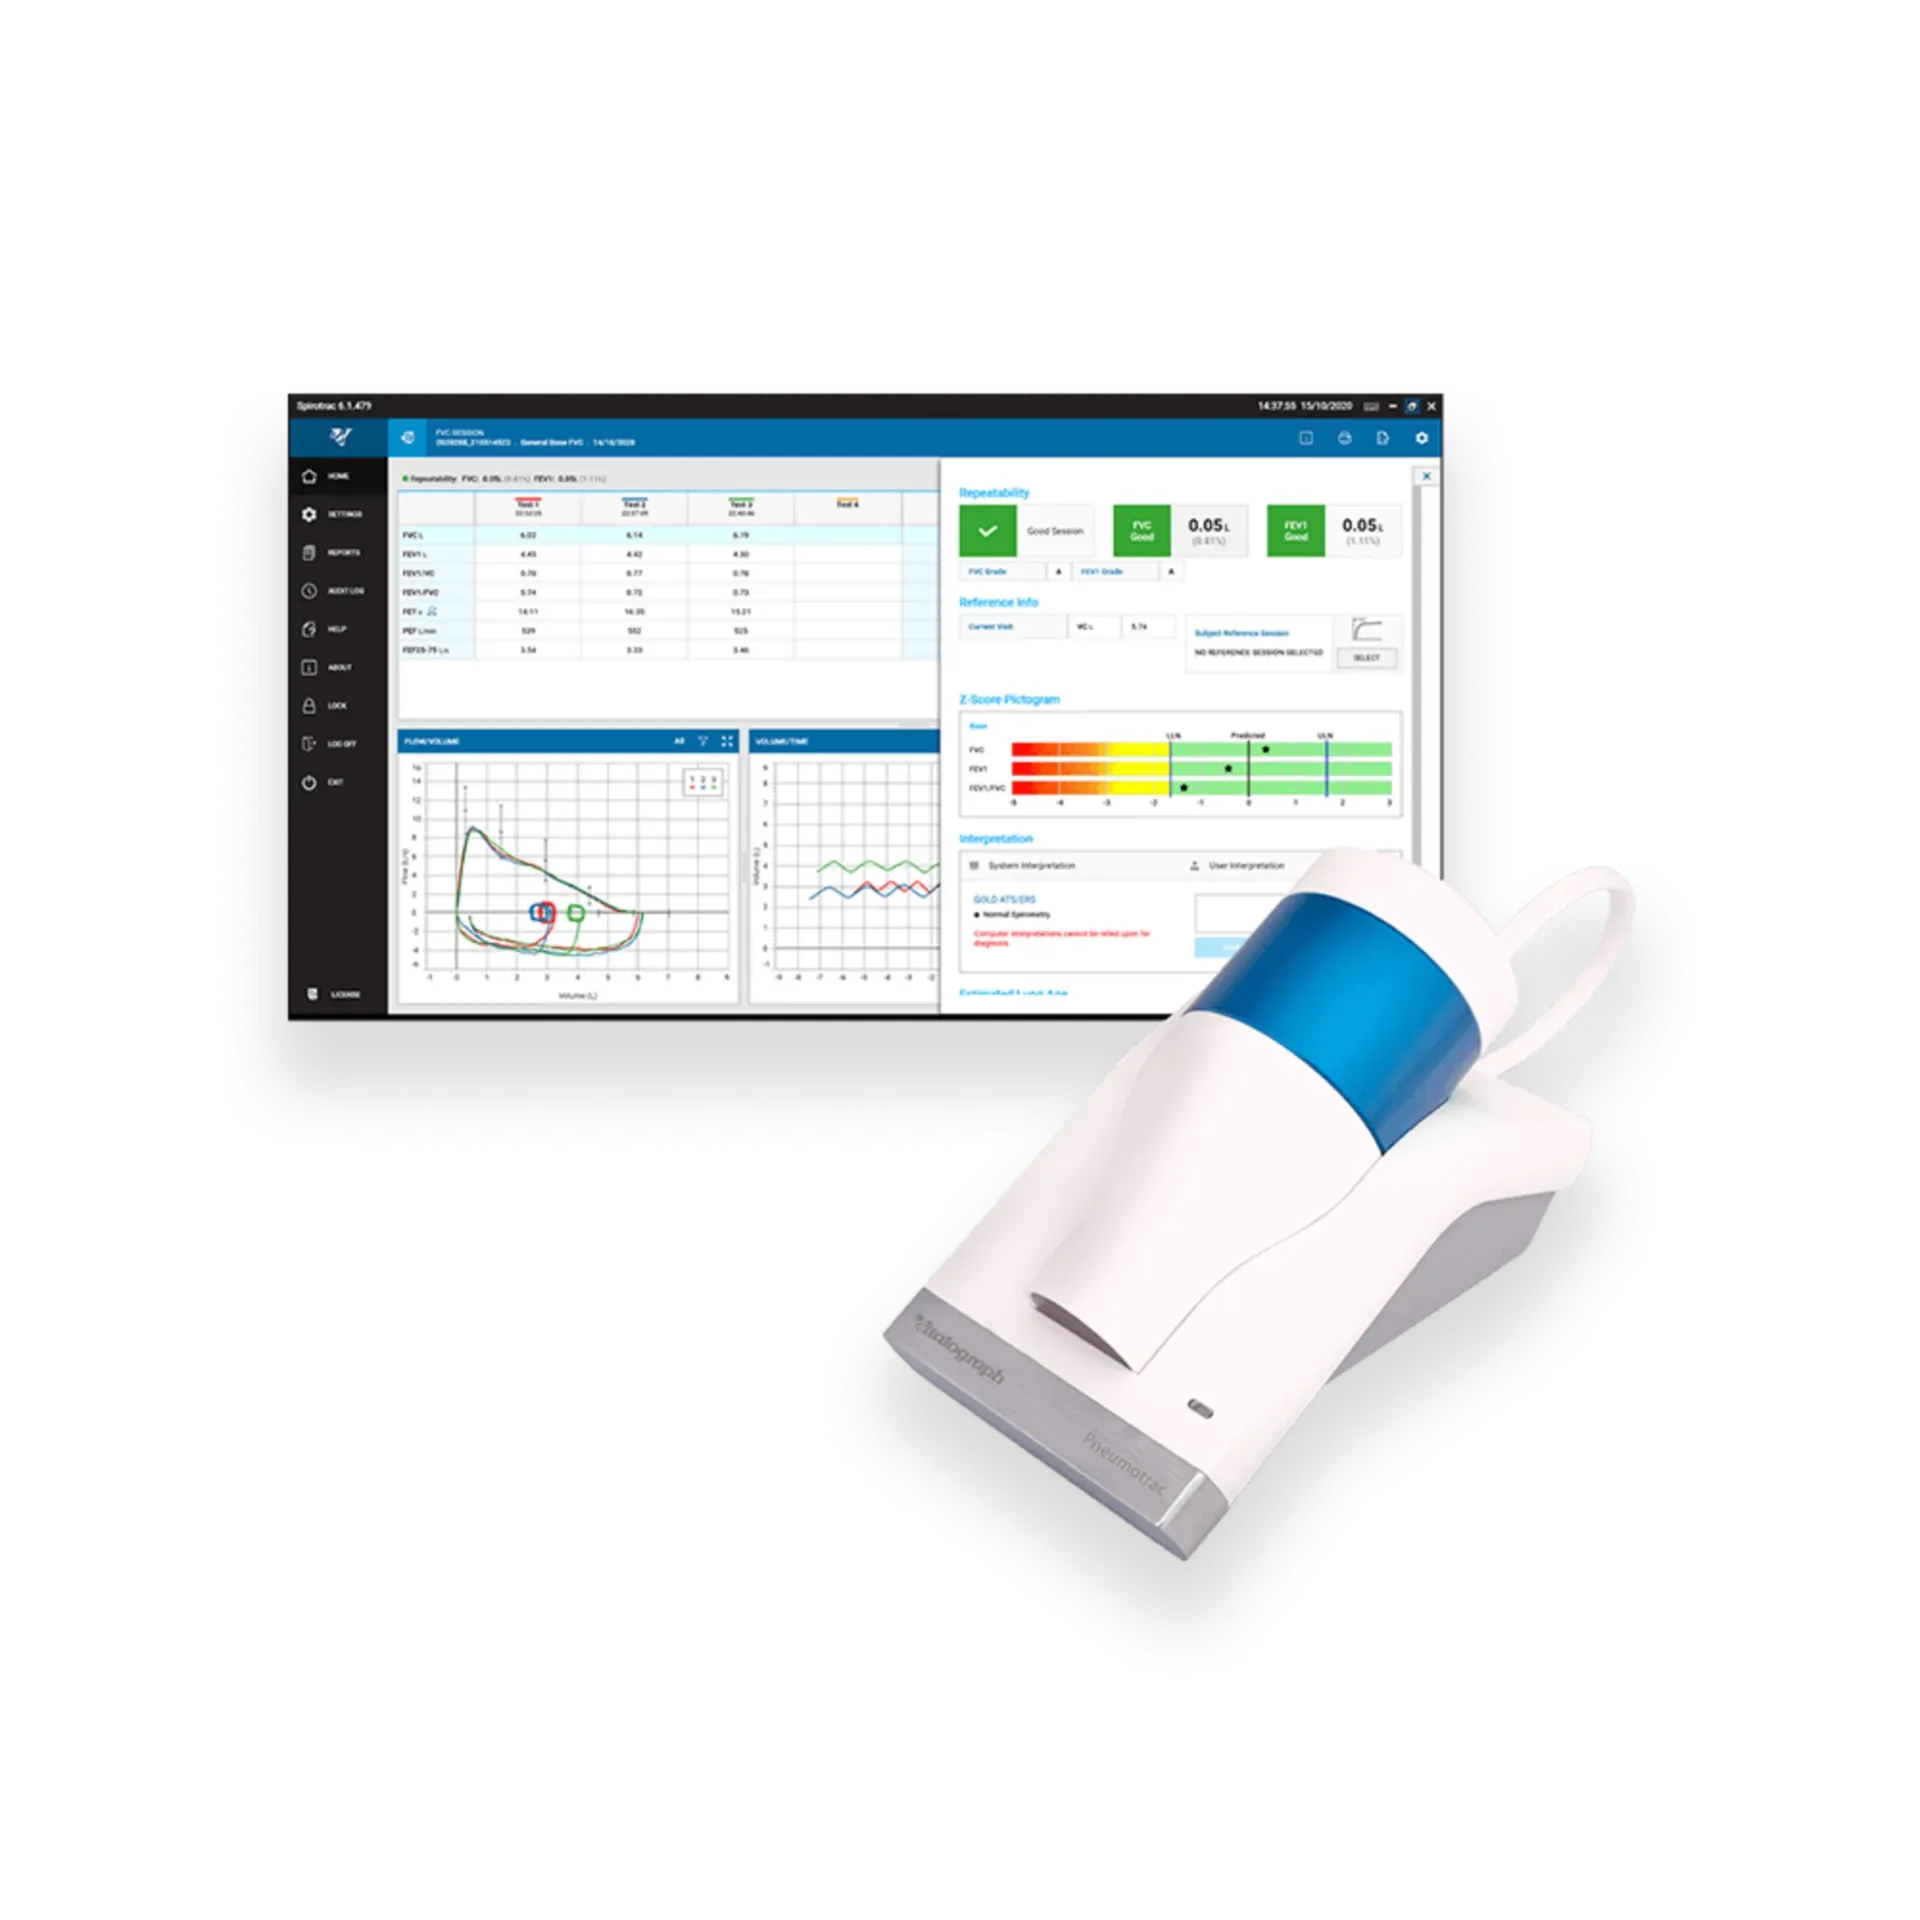 Pneumotrac™ Spirometer is shown with a screenshot of the Spirotrac® software in the background.